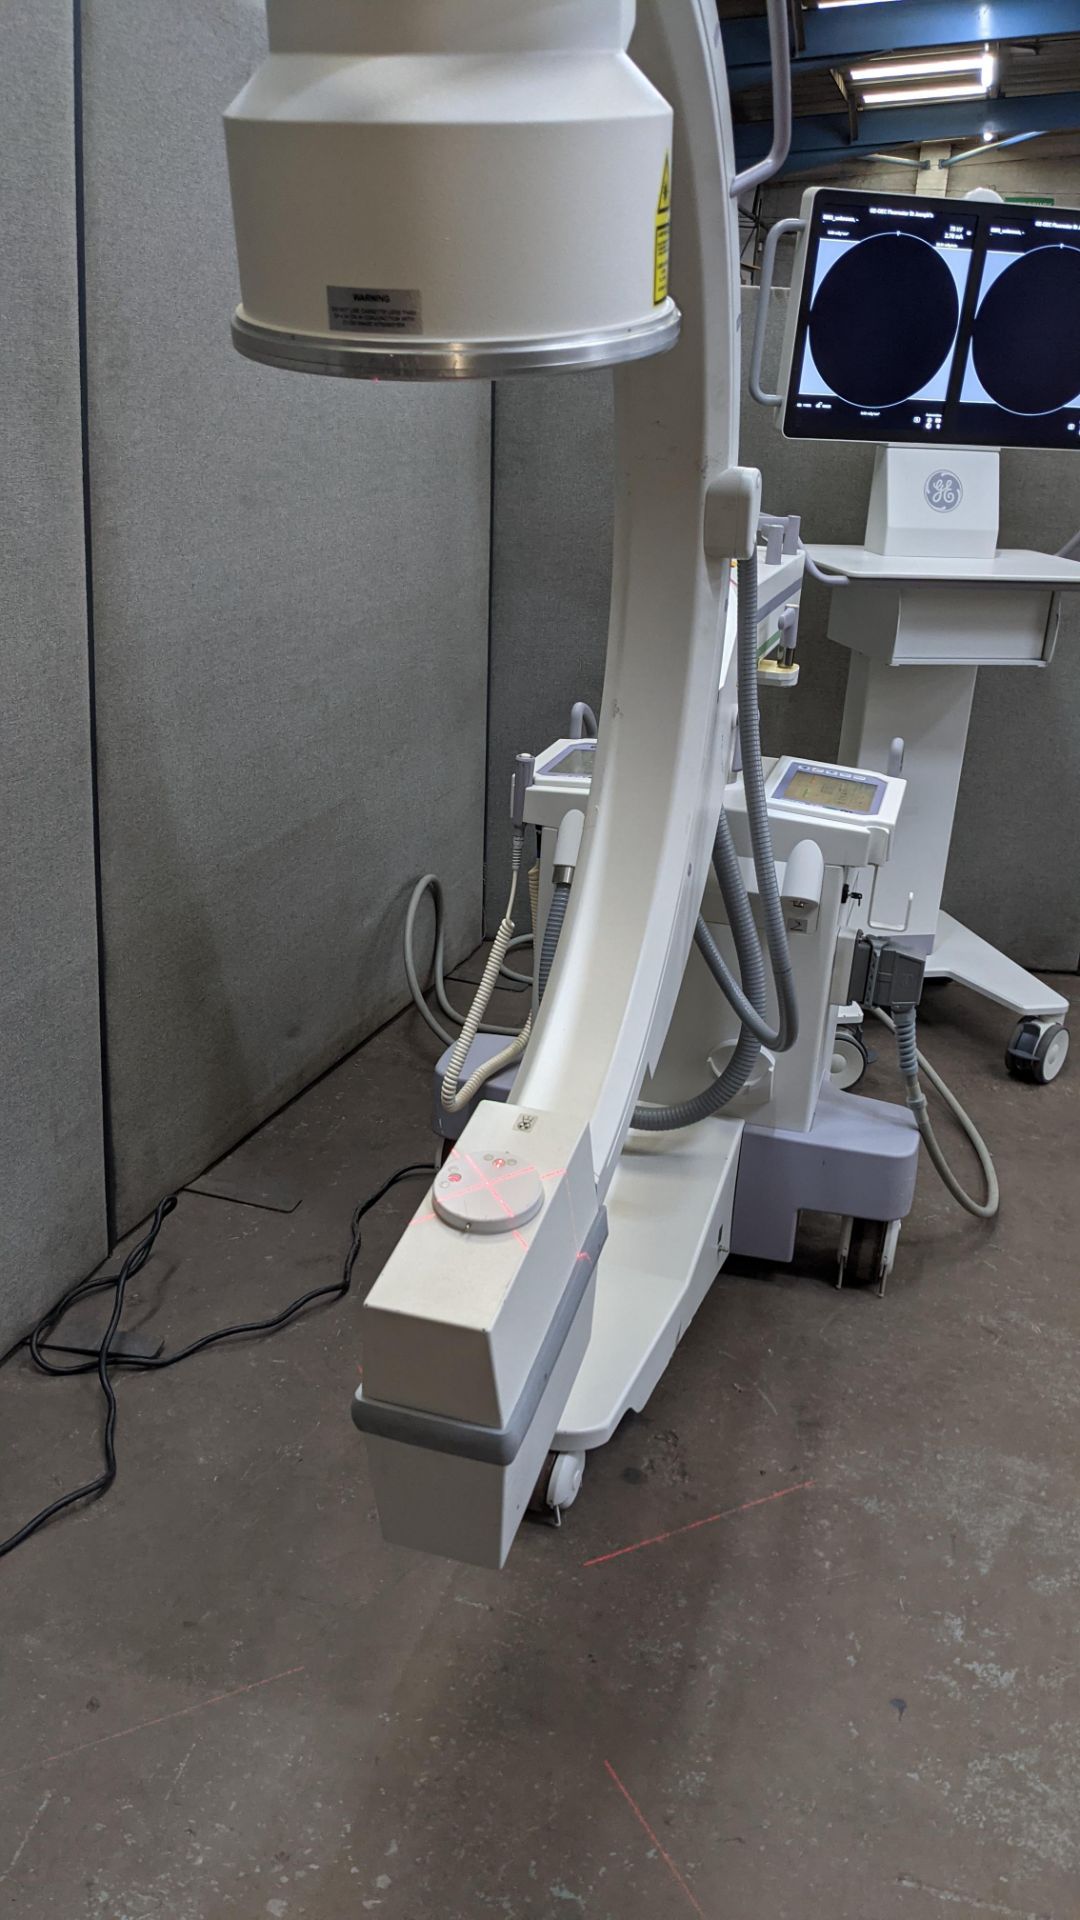 GE-OEC Fluorostar imaging system, purchased new in August 2017. EO4 Series. - Image 66 of 68